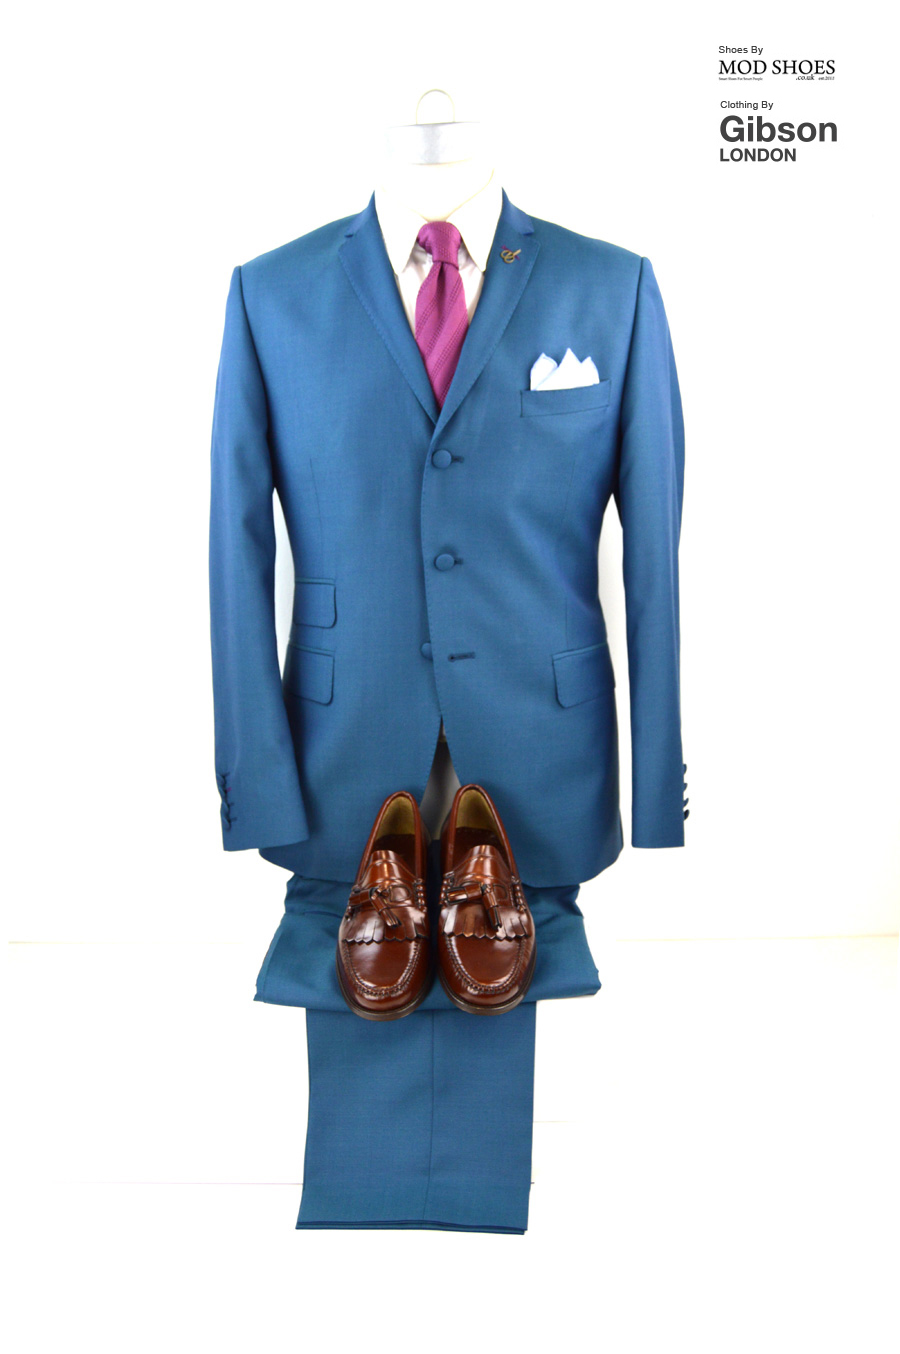 modshoes-with-gibson-clothing-mod-suit